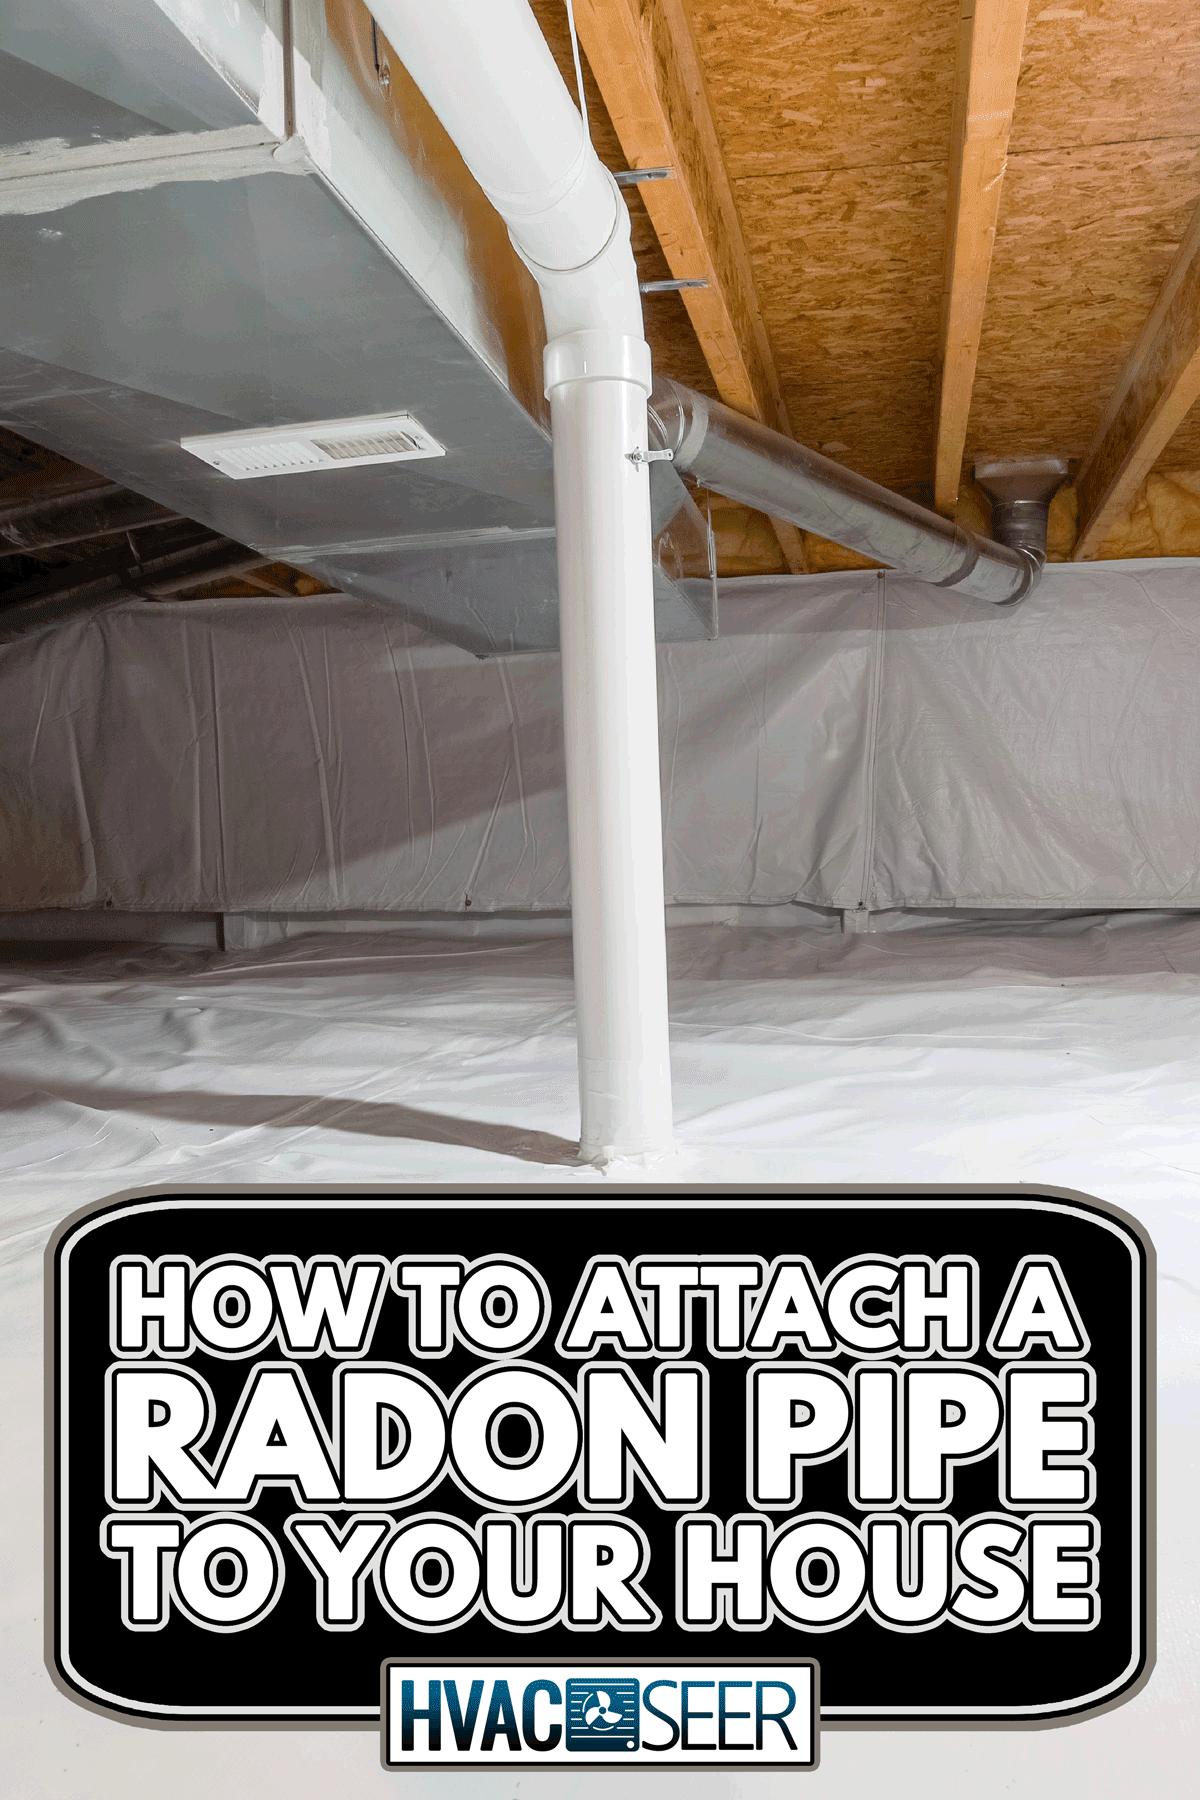 Radon mitigation system pipe on the basement, How To Attach A Radon Pipe To Your House